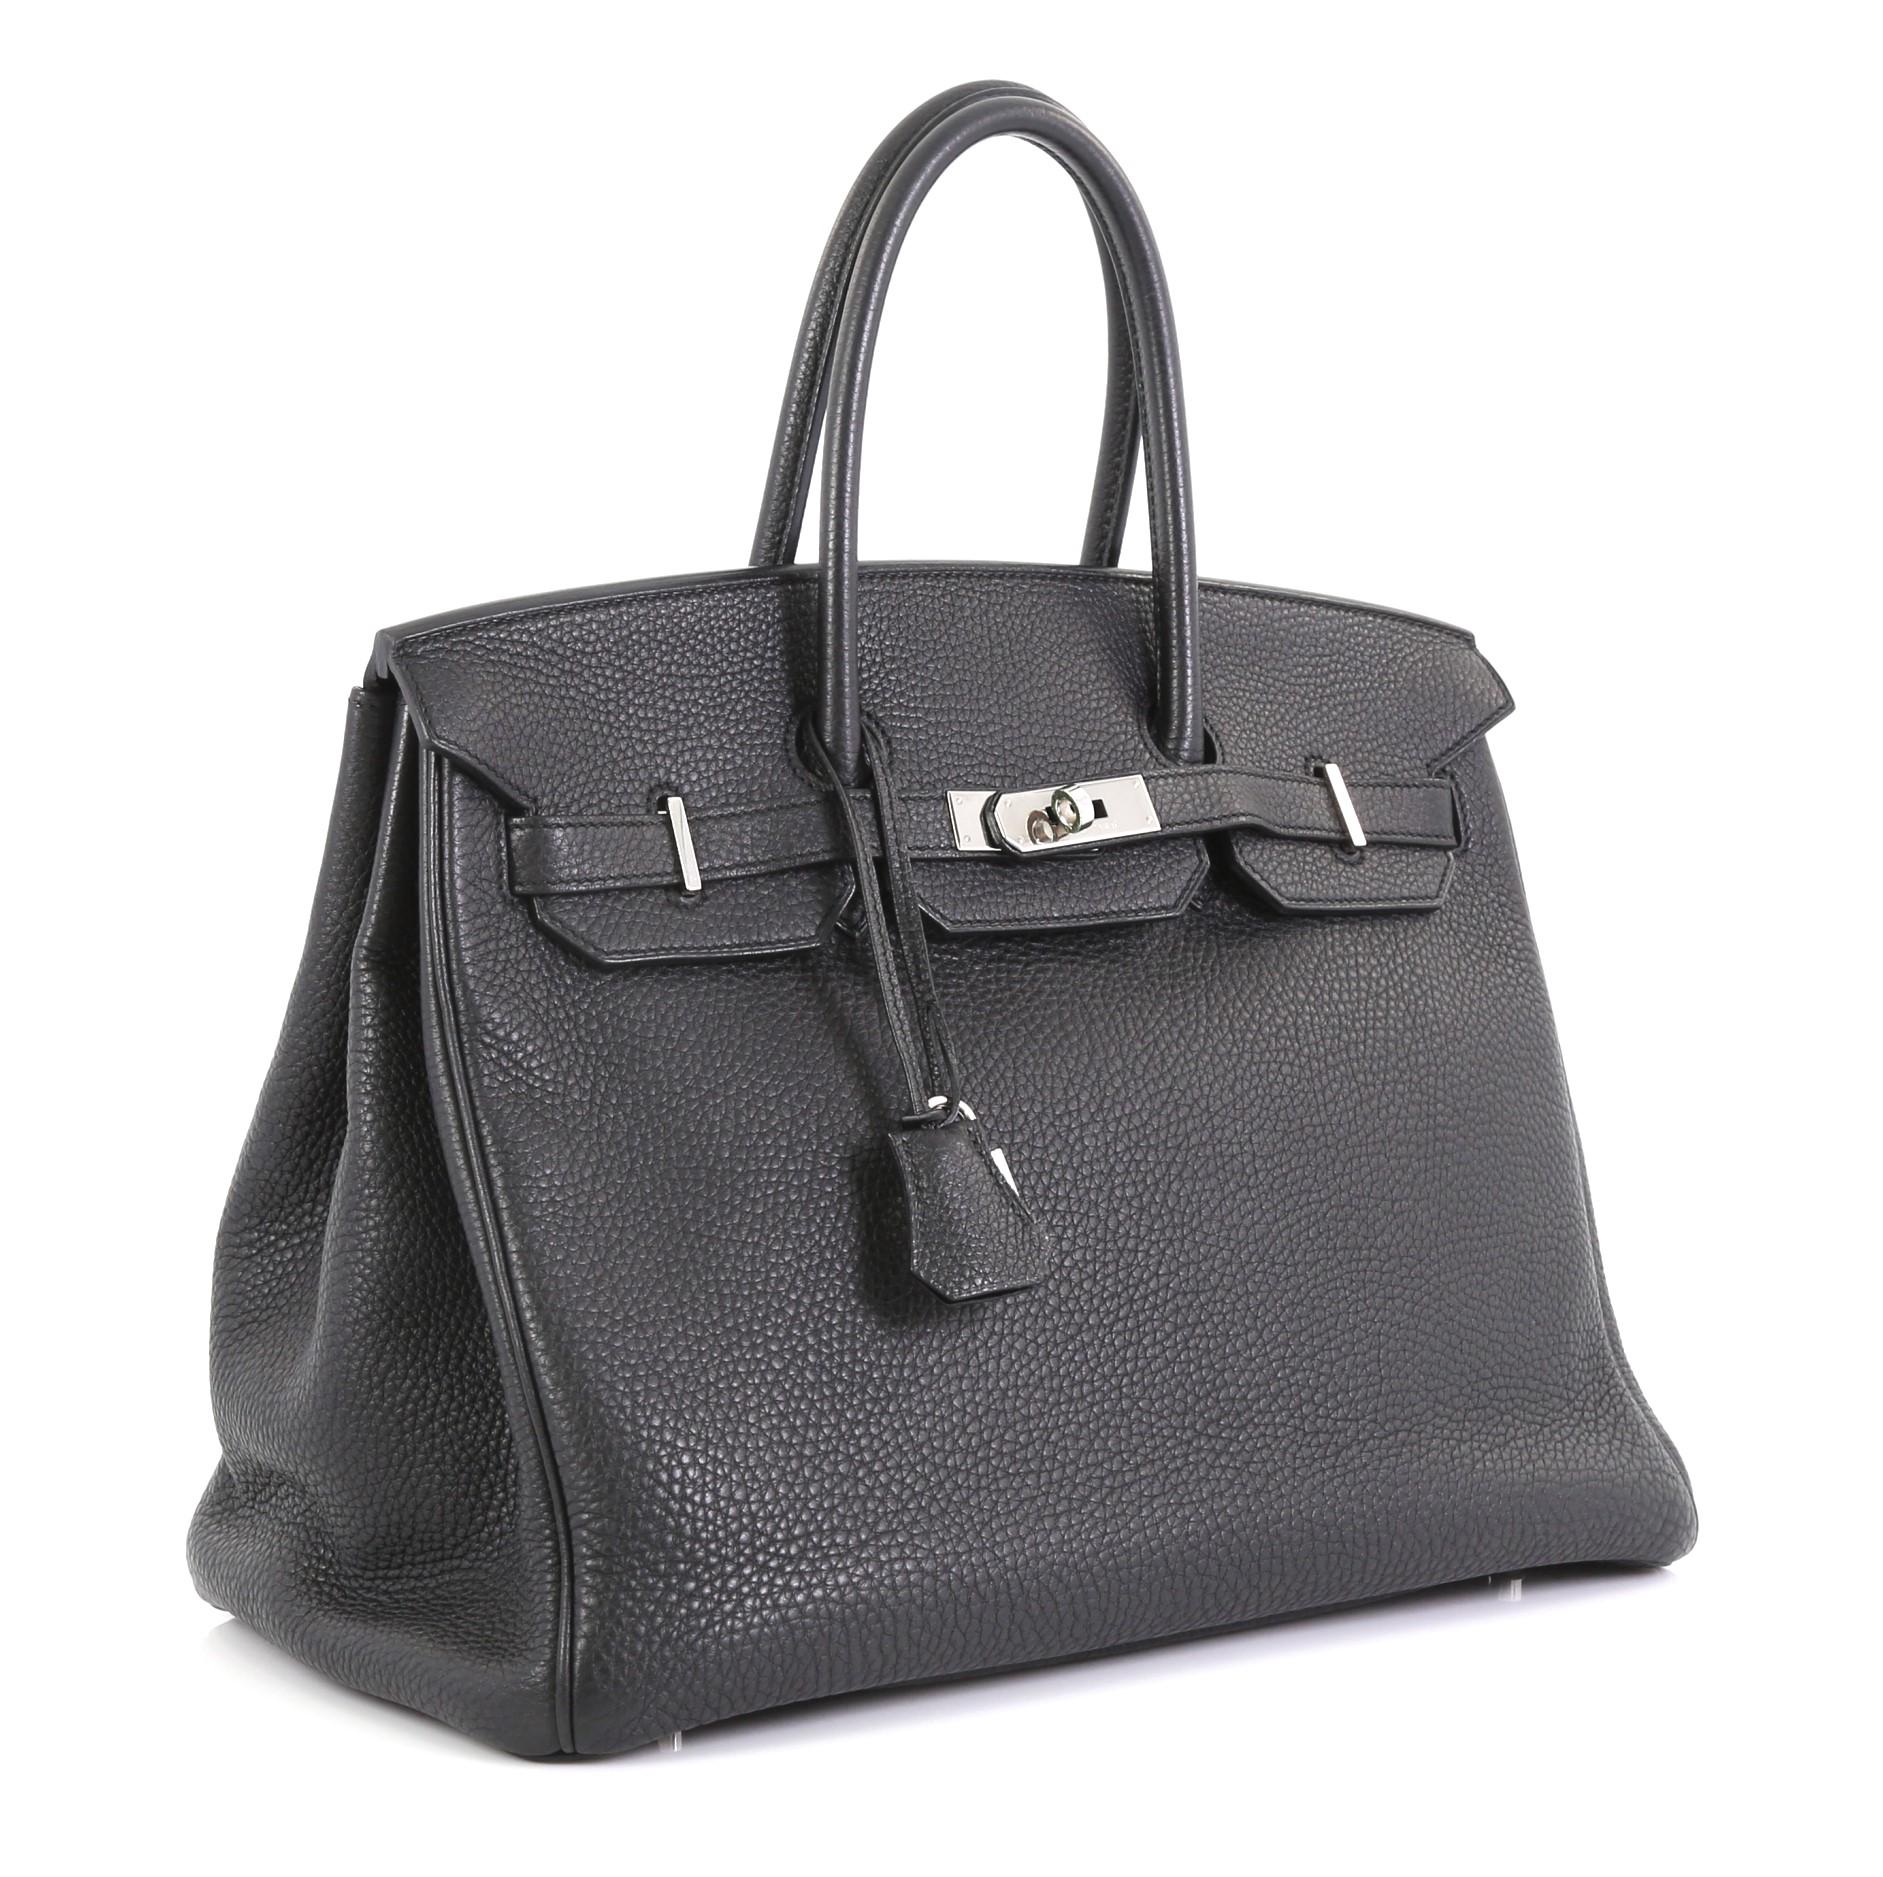 This Hermes Birkin Handbag Noir Clemence with Palladium Hardware 35, crafted in Noir black Clemence leather, features dual rolled handles, frontal flap, and palladium hardware. Its turn-lock closure opens to a Noir black Chevre leather interior with